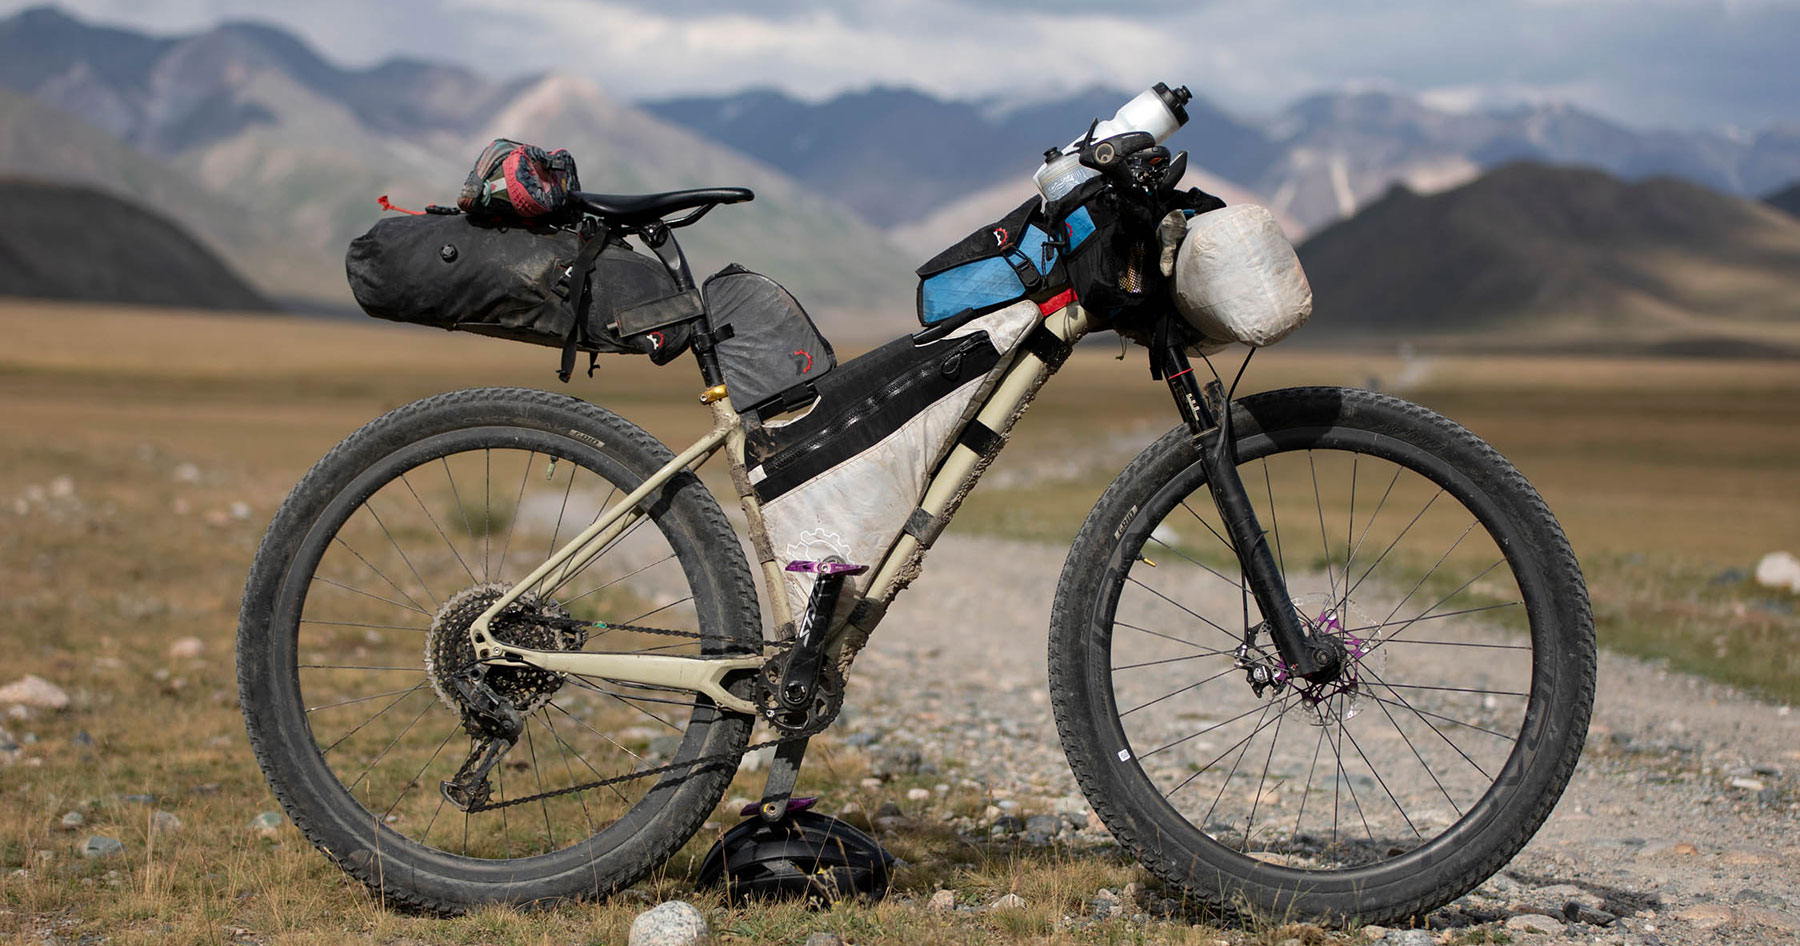 Lael S 2019 Silk Road Mountain Race Rig And Kit Bikepacking Com